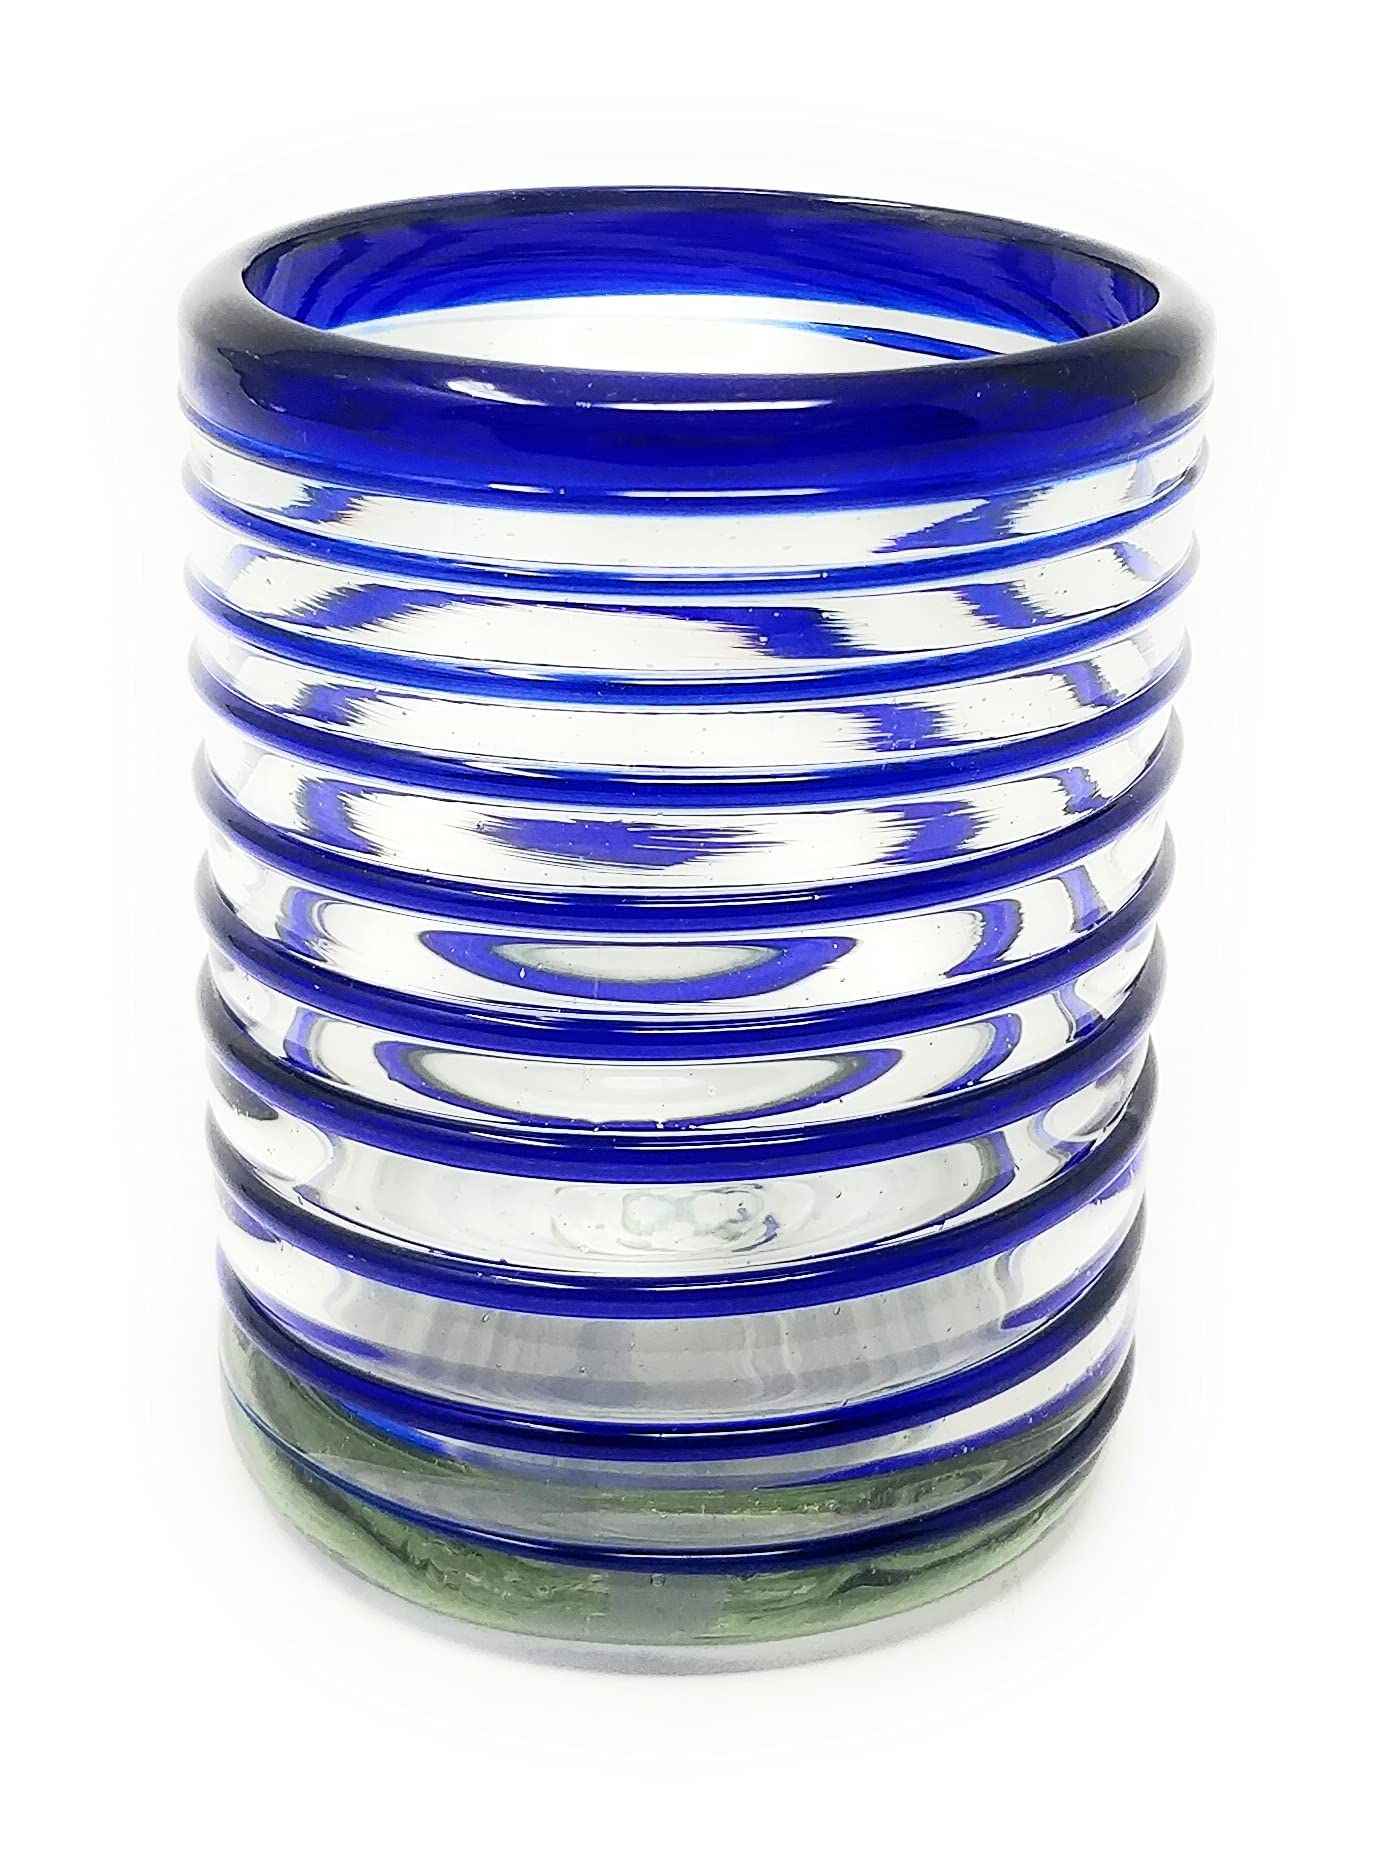 Hand Blown Mexican Drinking Glasses – Set of 6 Tumbler Glasses with Blue Spiral Design (10 oz each) …